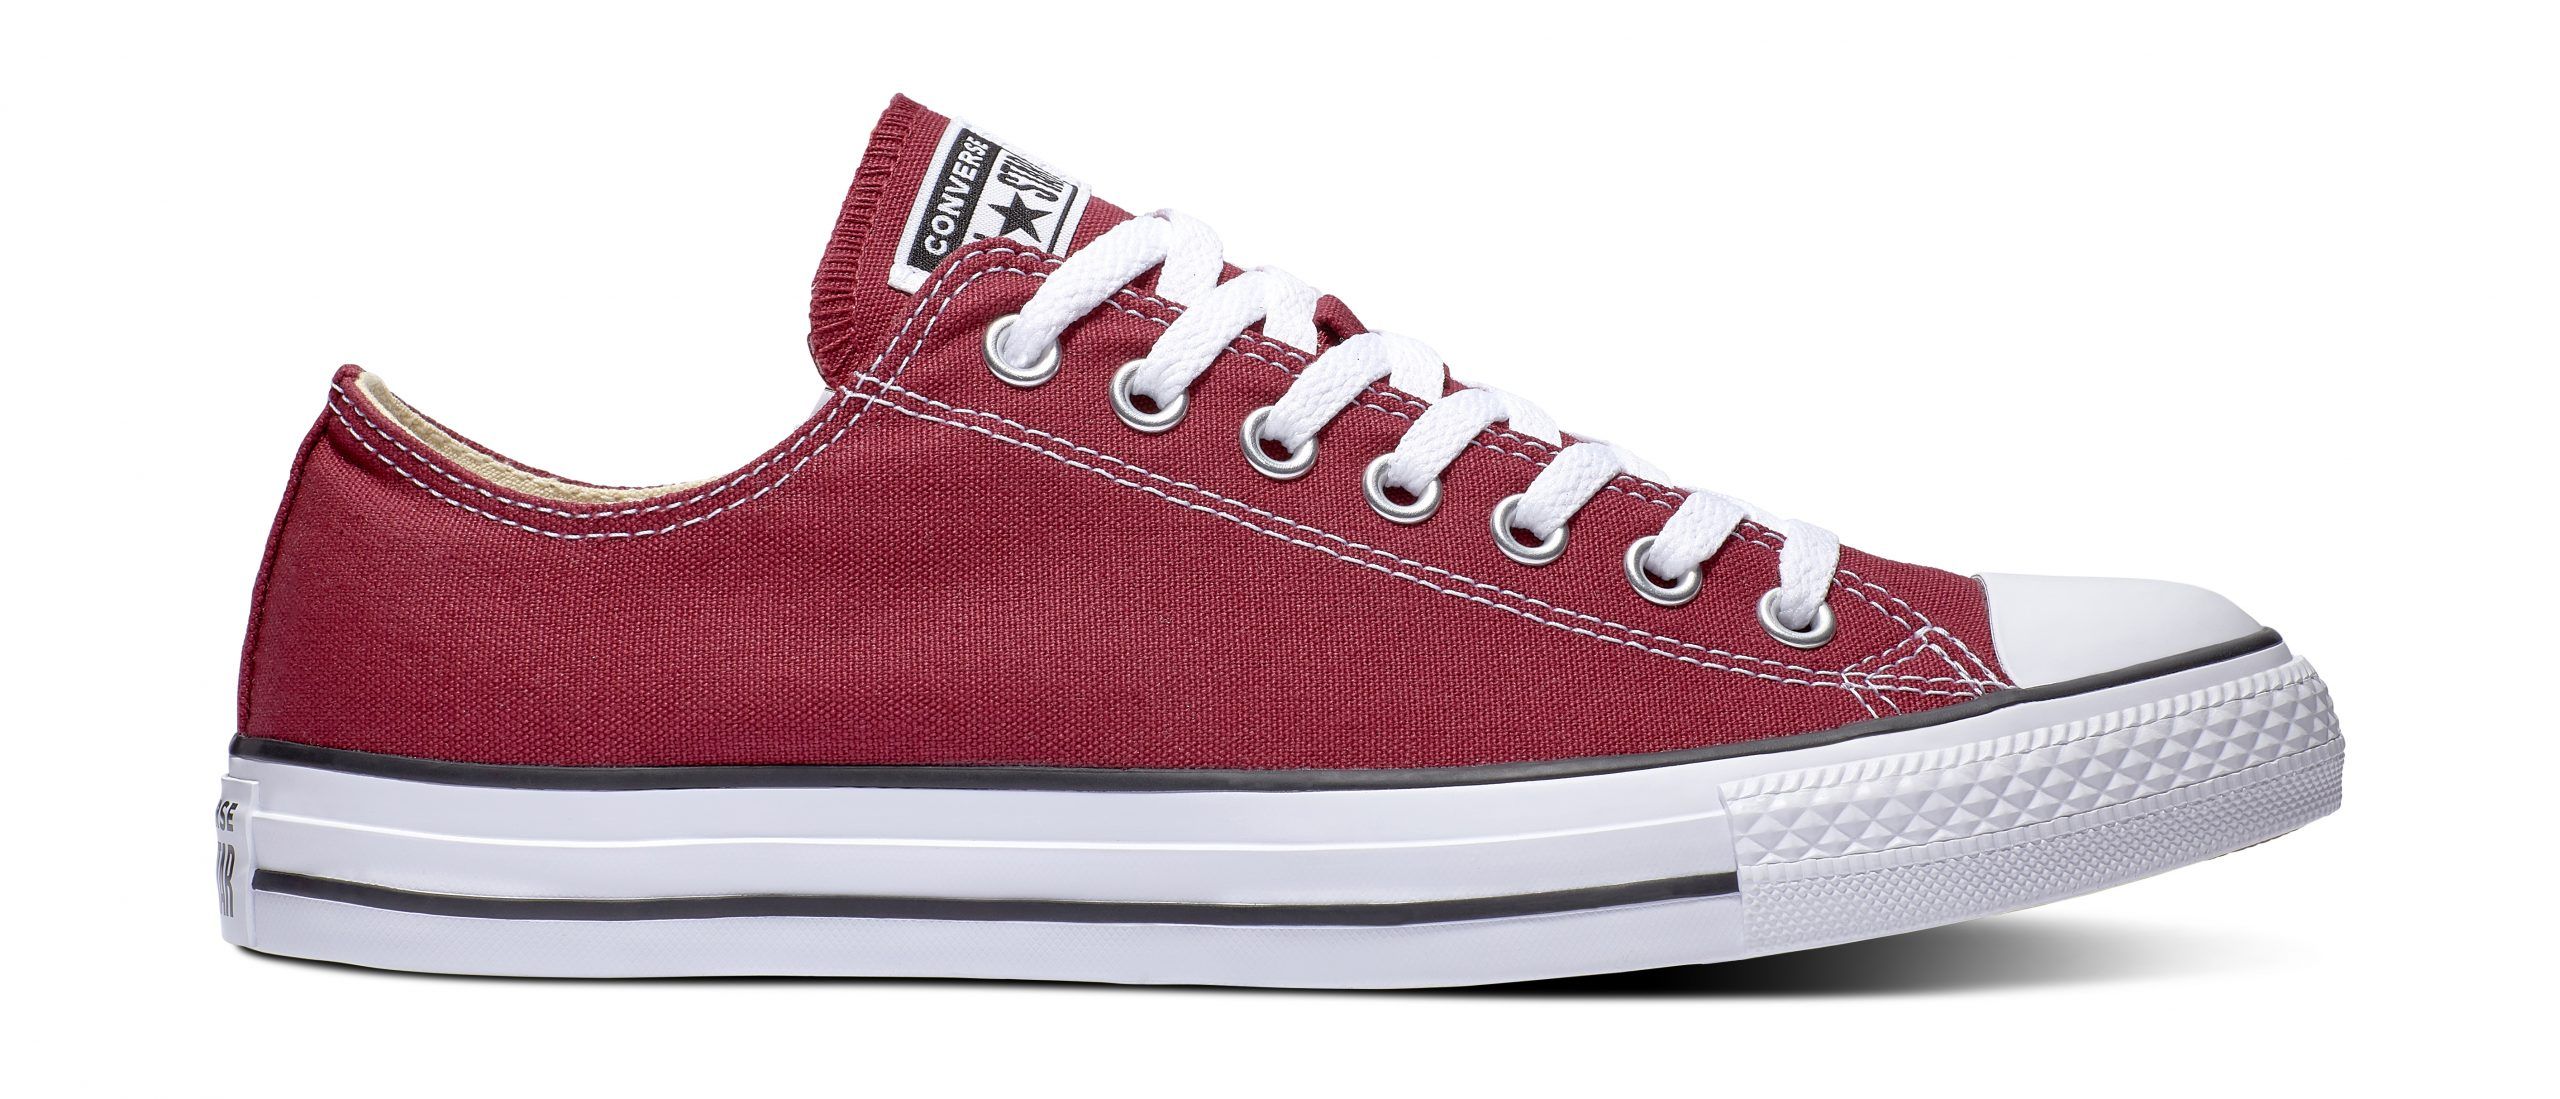 Converse Chuck Taylor All Star Low Top Sneakers